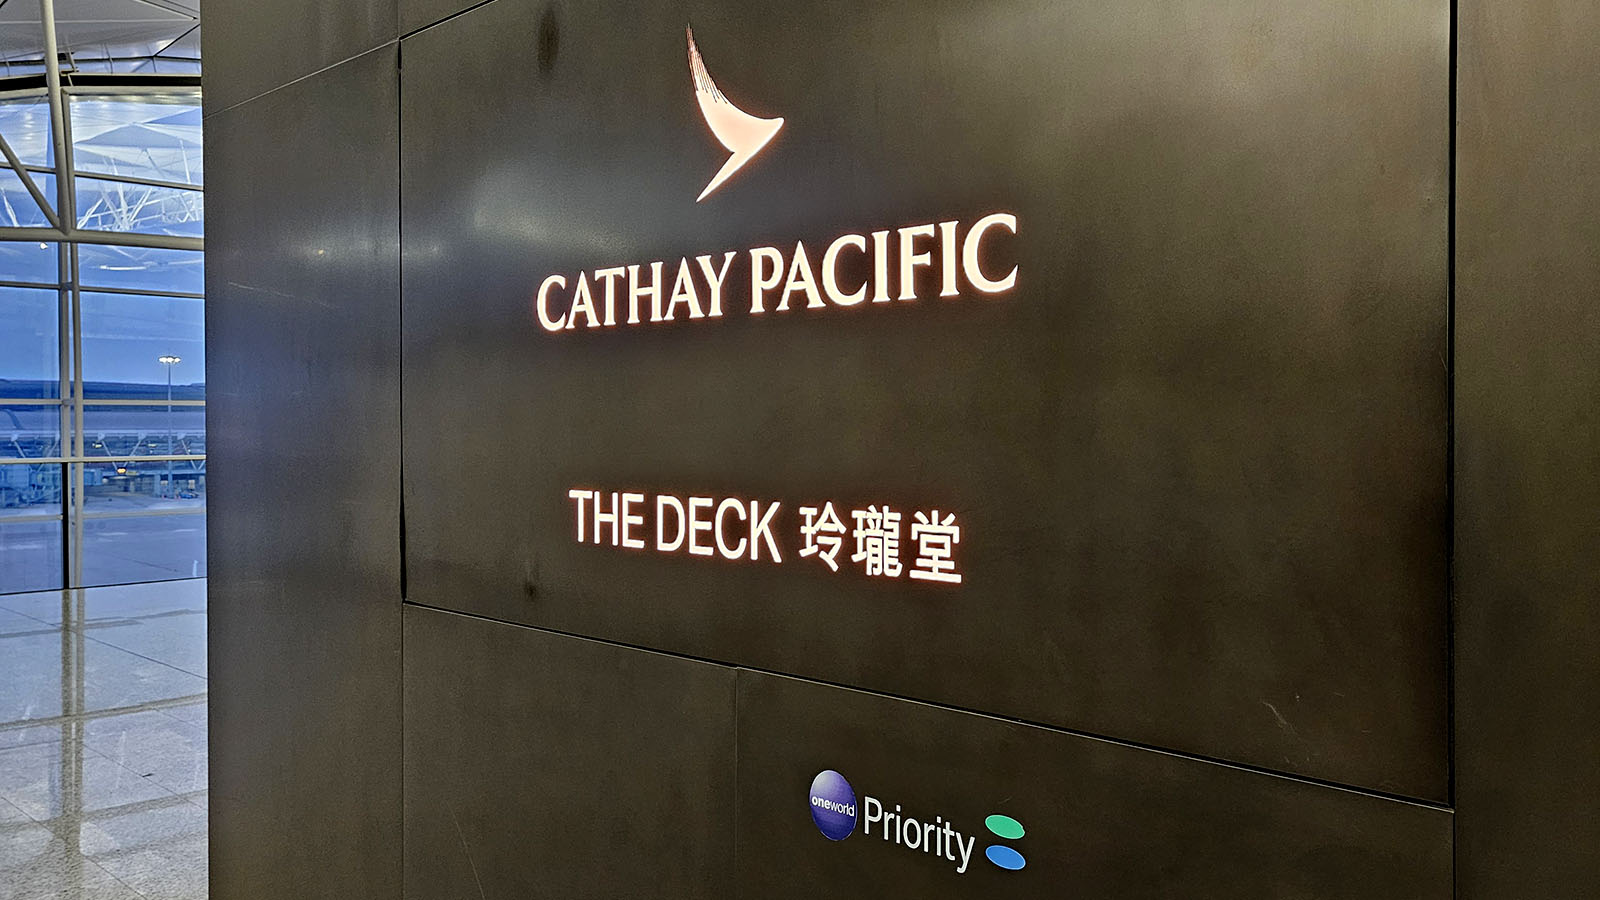 Outside The Deck by Cathay Pacific